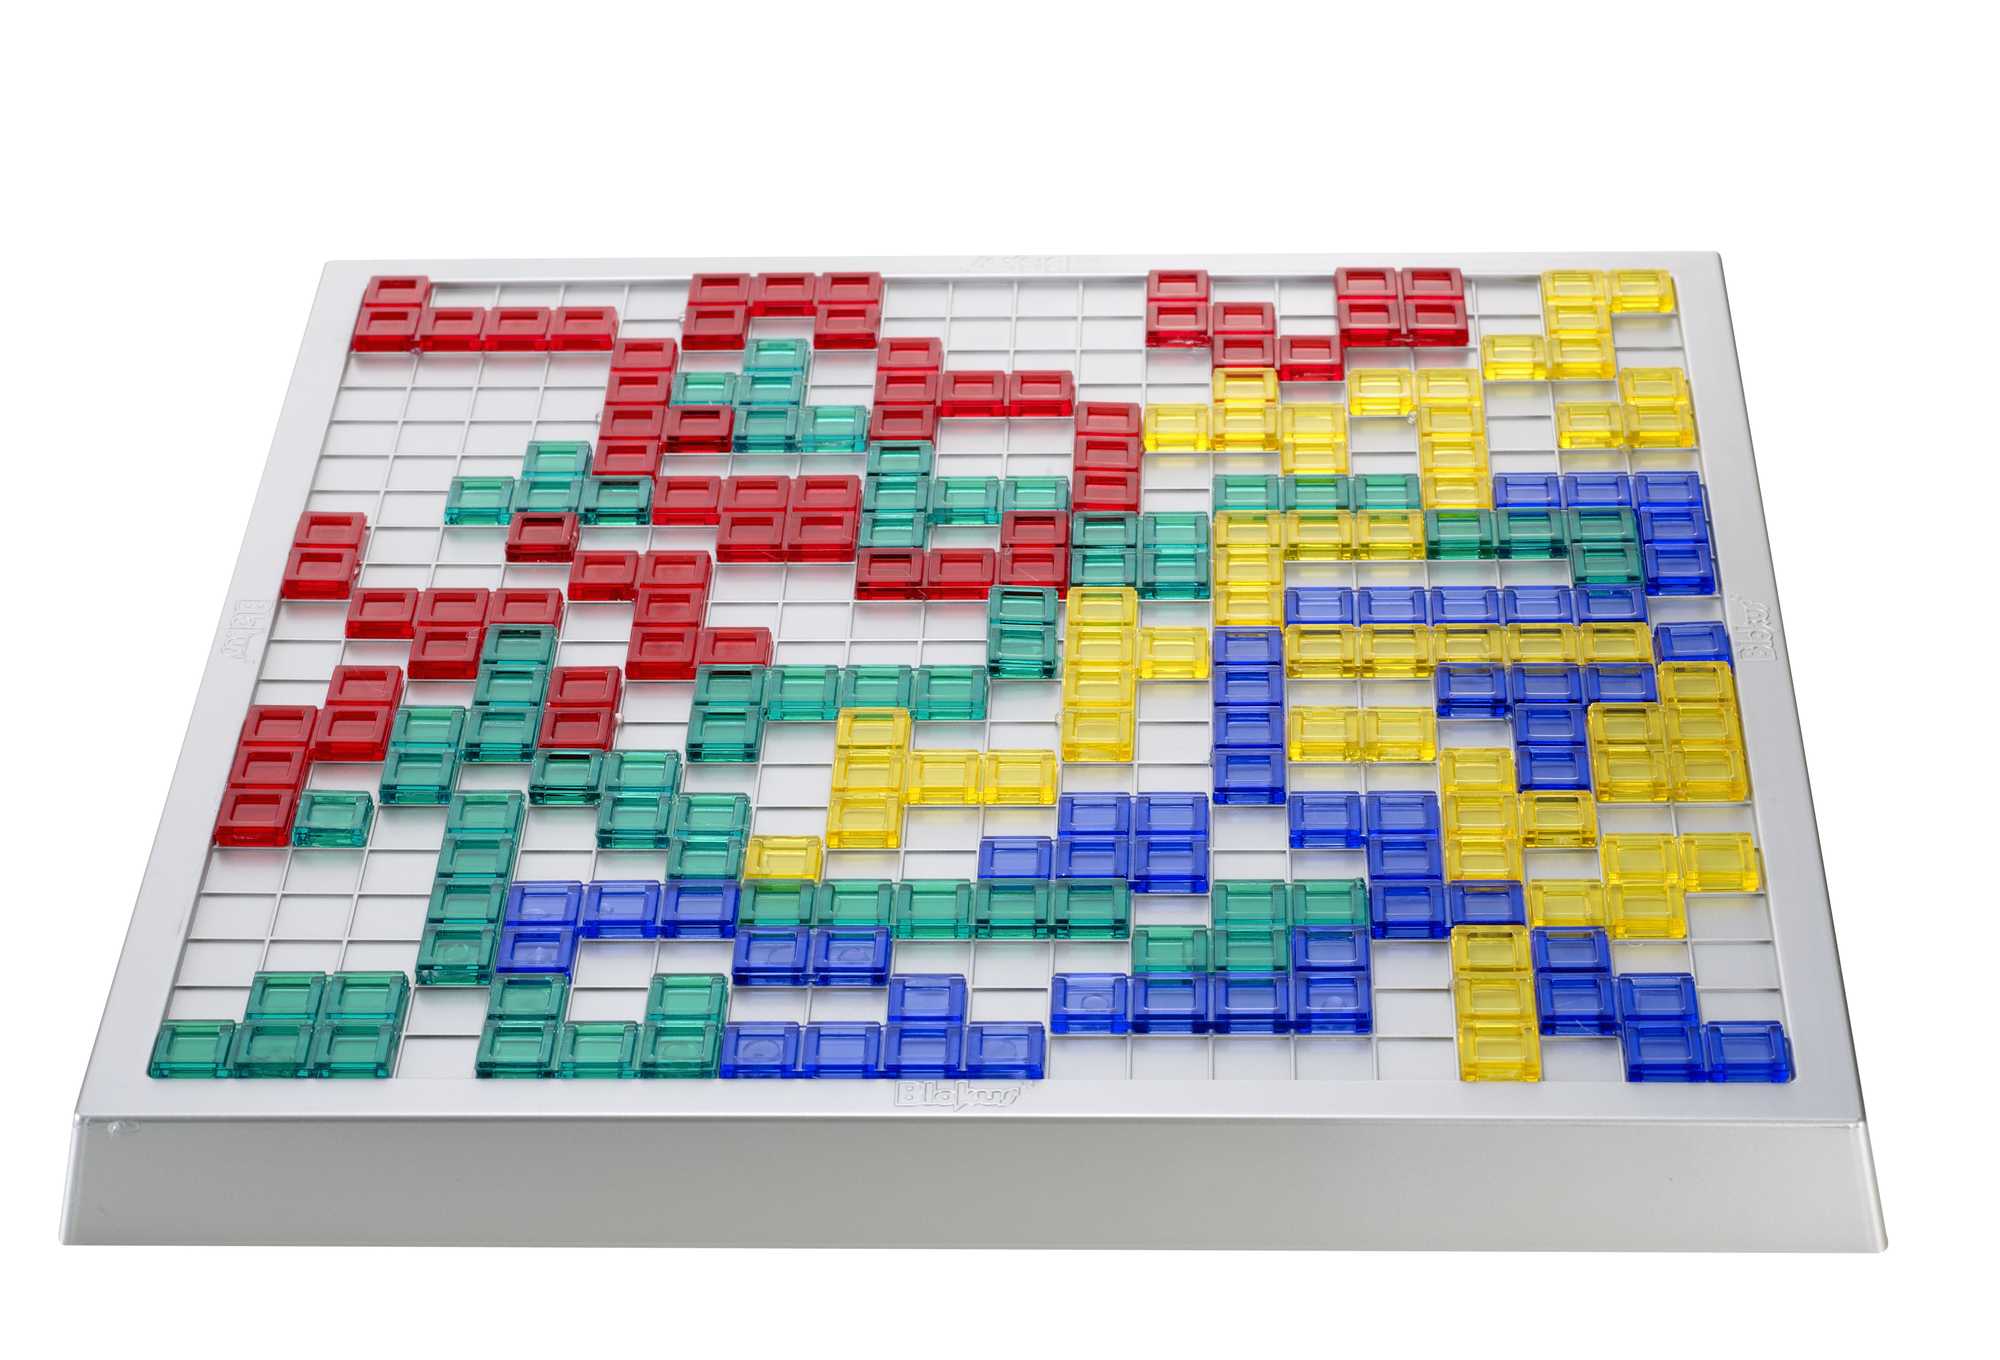 Blokus XL Family Board Games, Brain Games with Large Board and Pieces - image 5 of 6